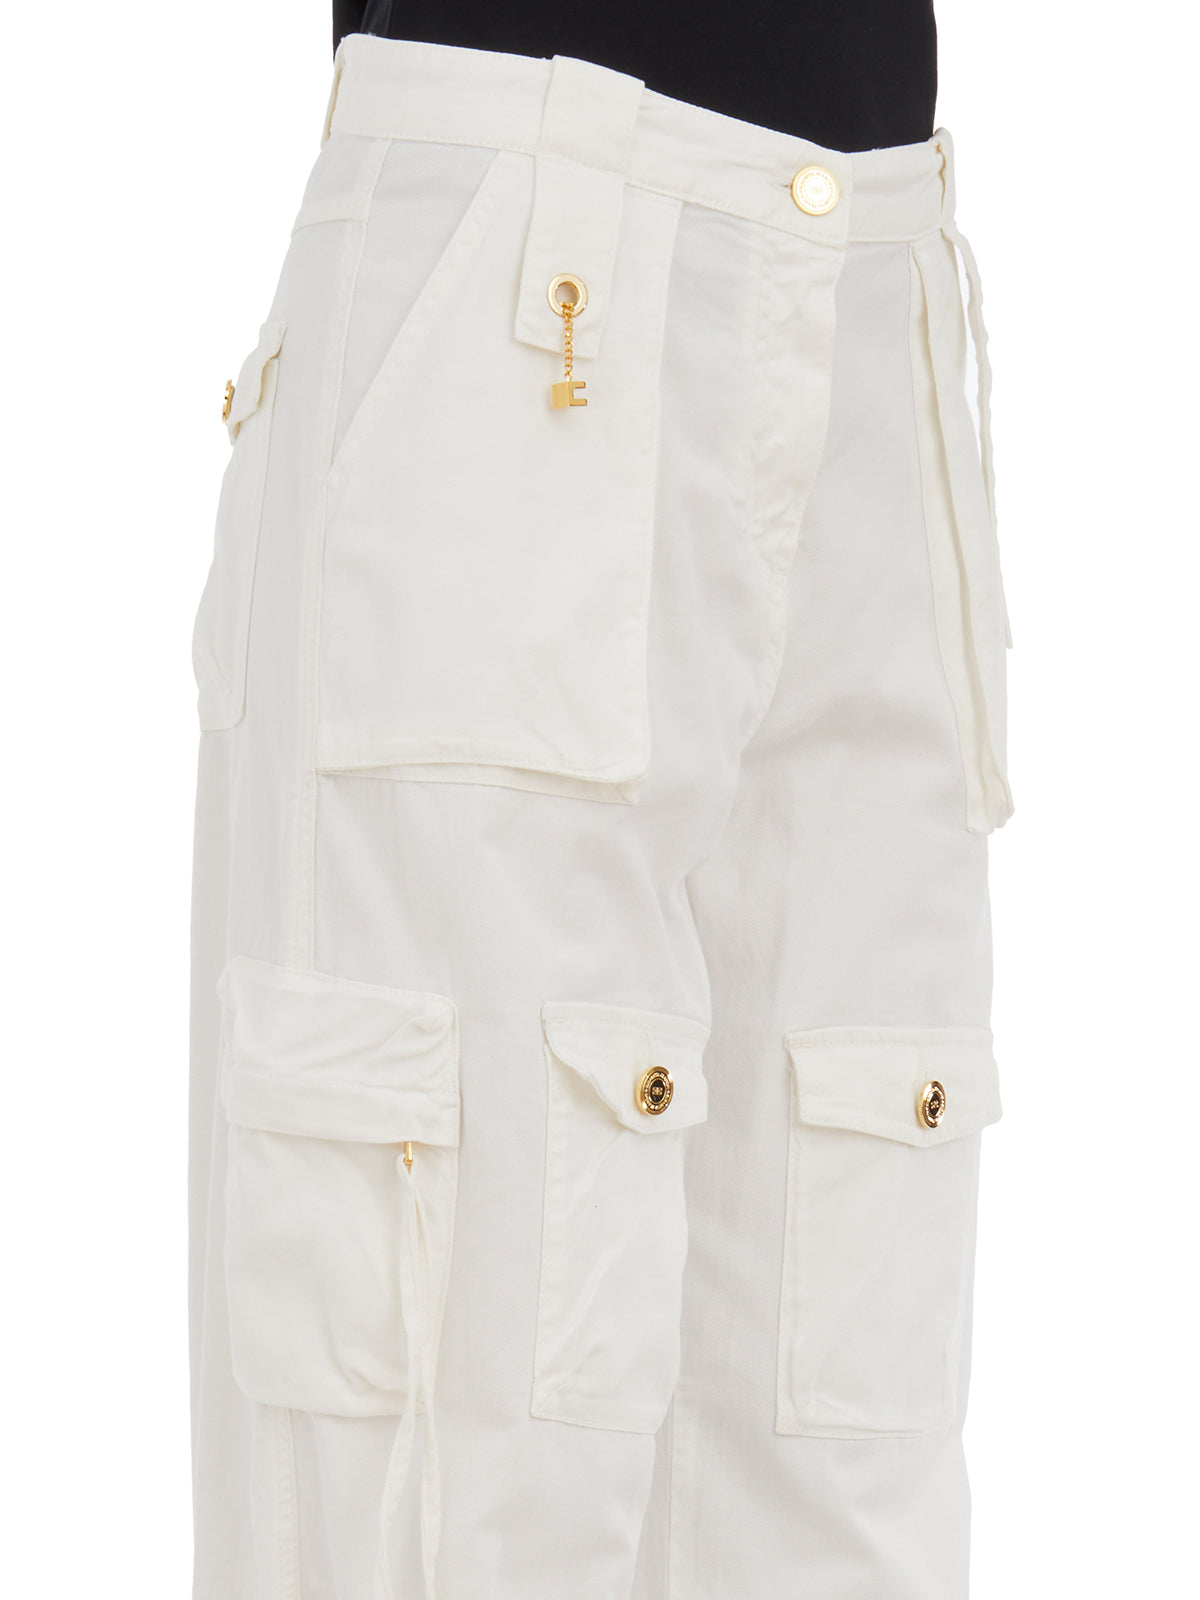 White Cargo Pants with Golden Metal Details - Women's SS24 Collection